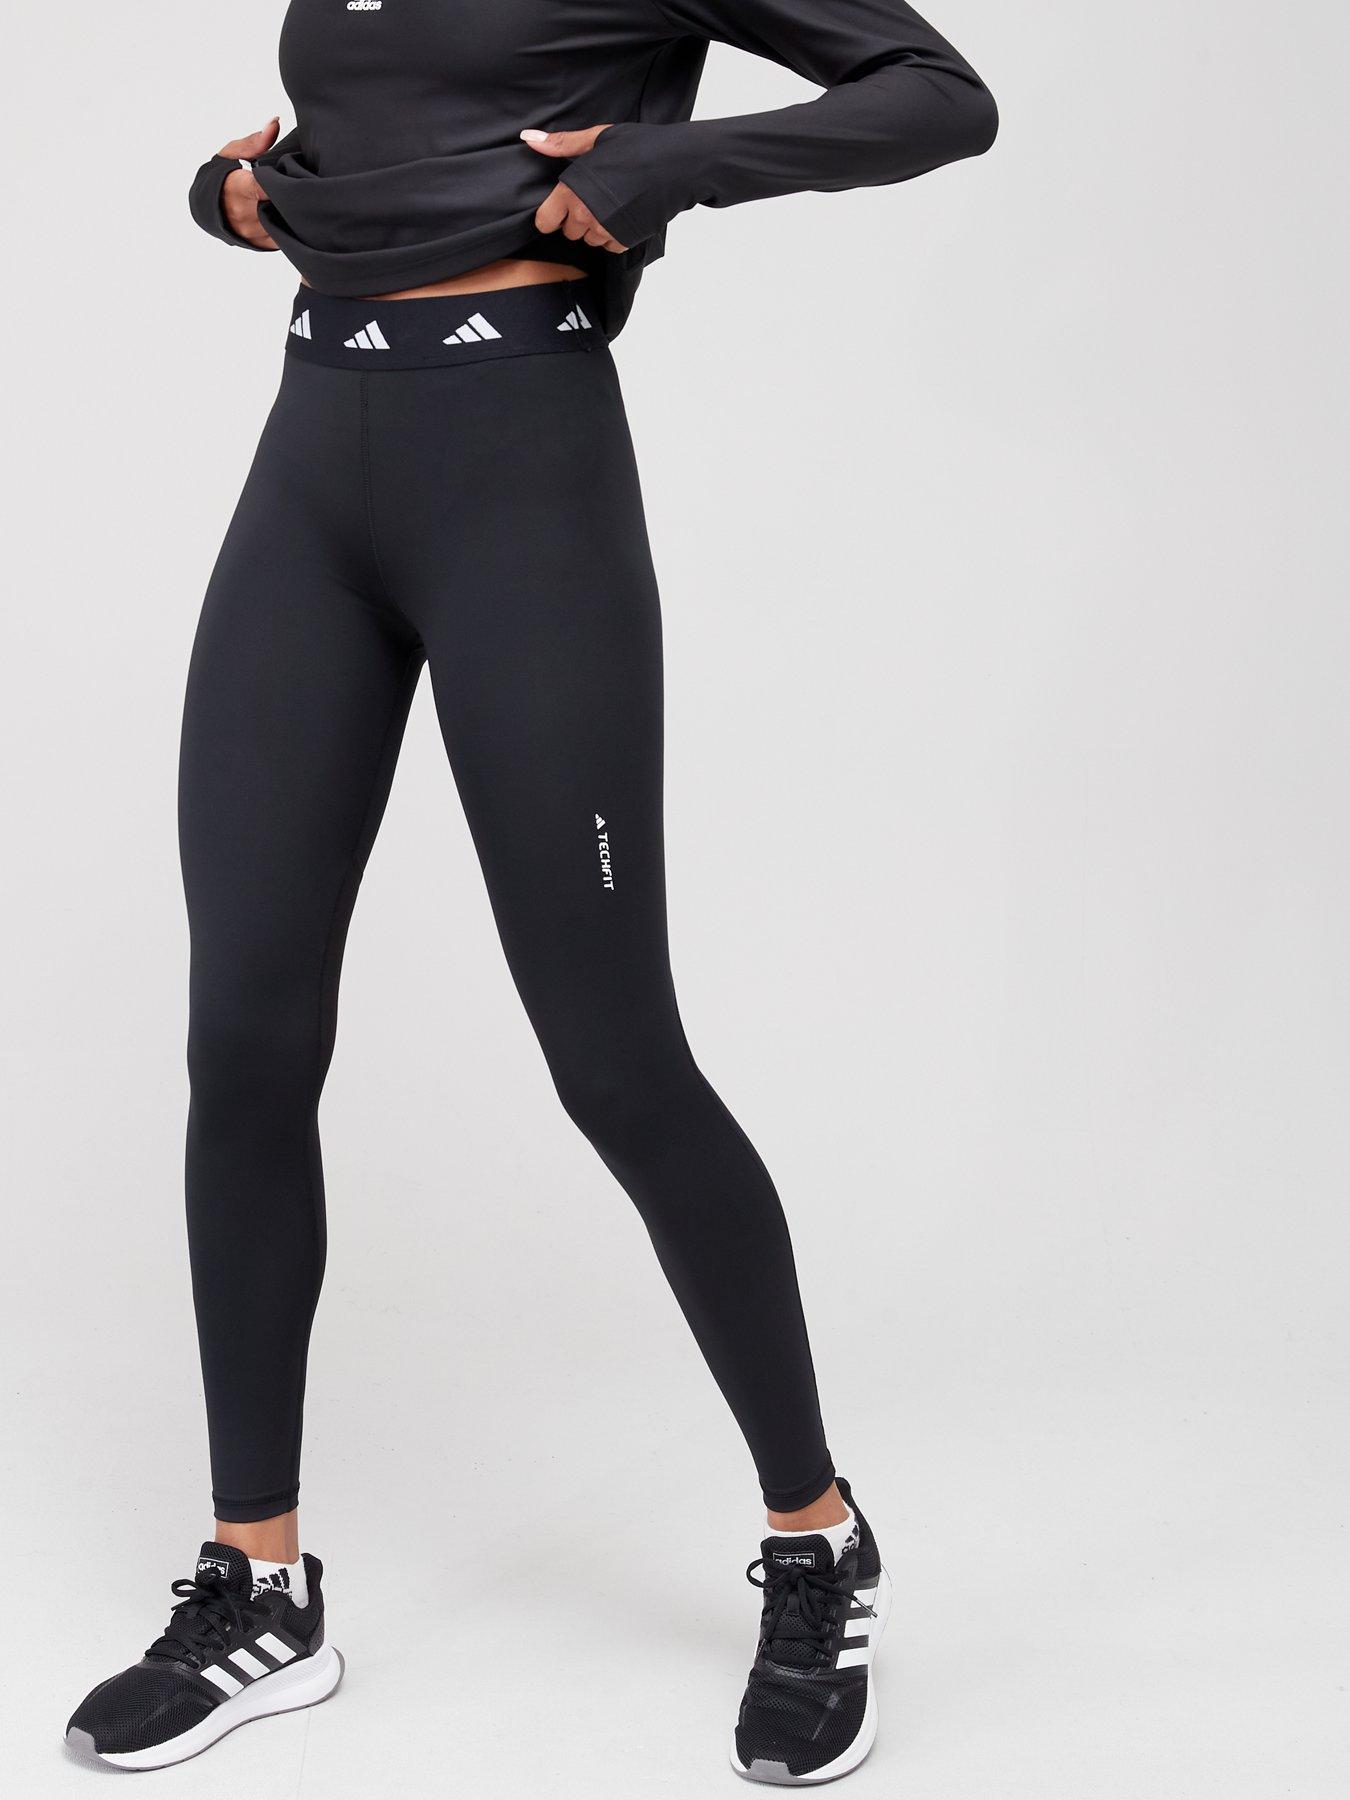 adidas Women's Fitted Leggings